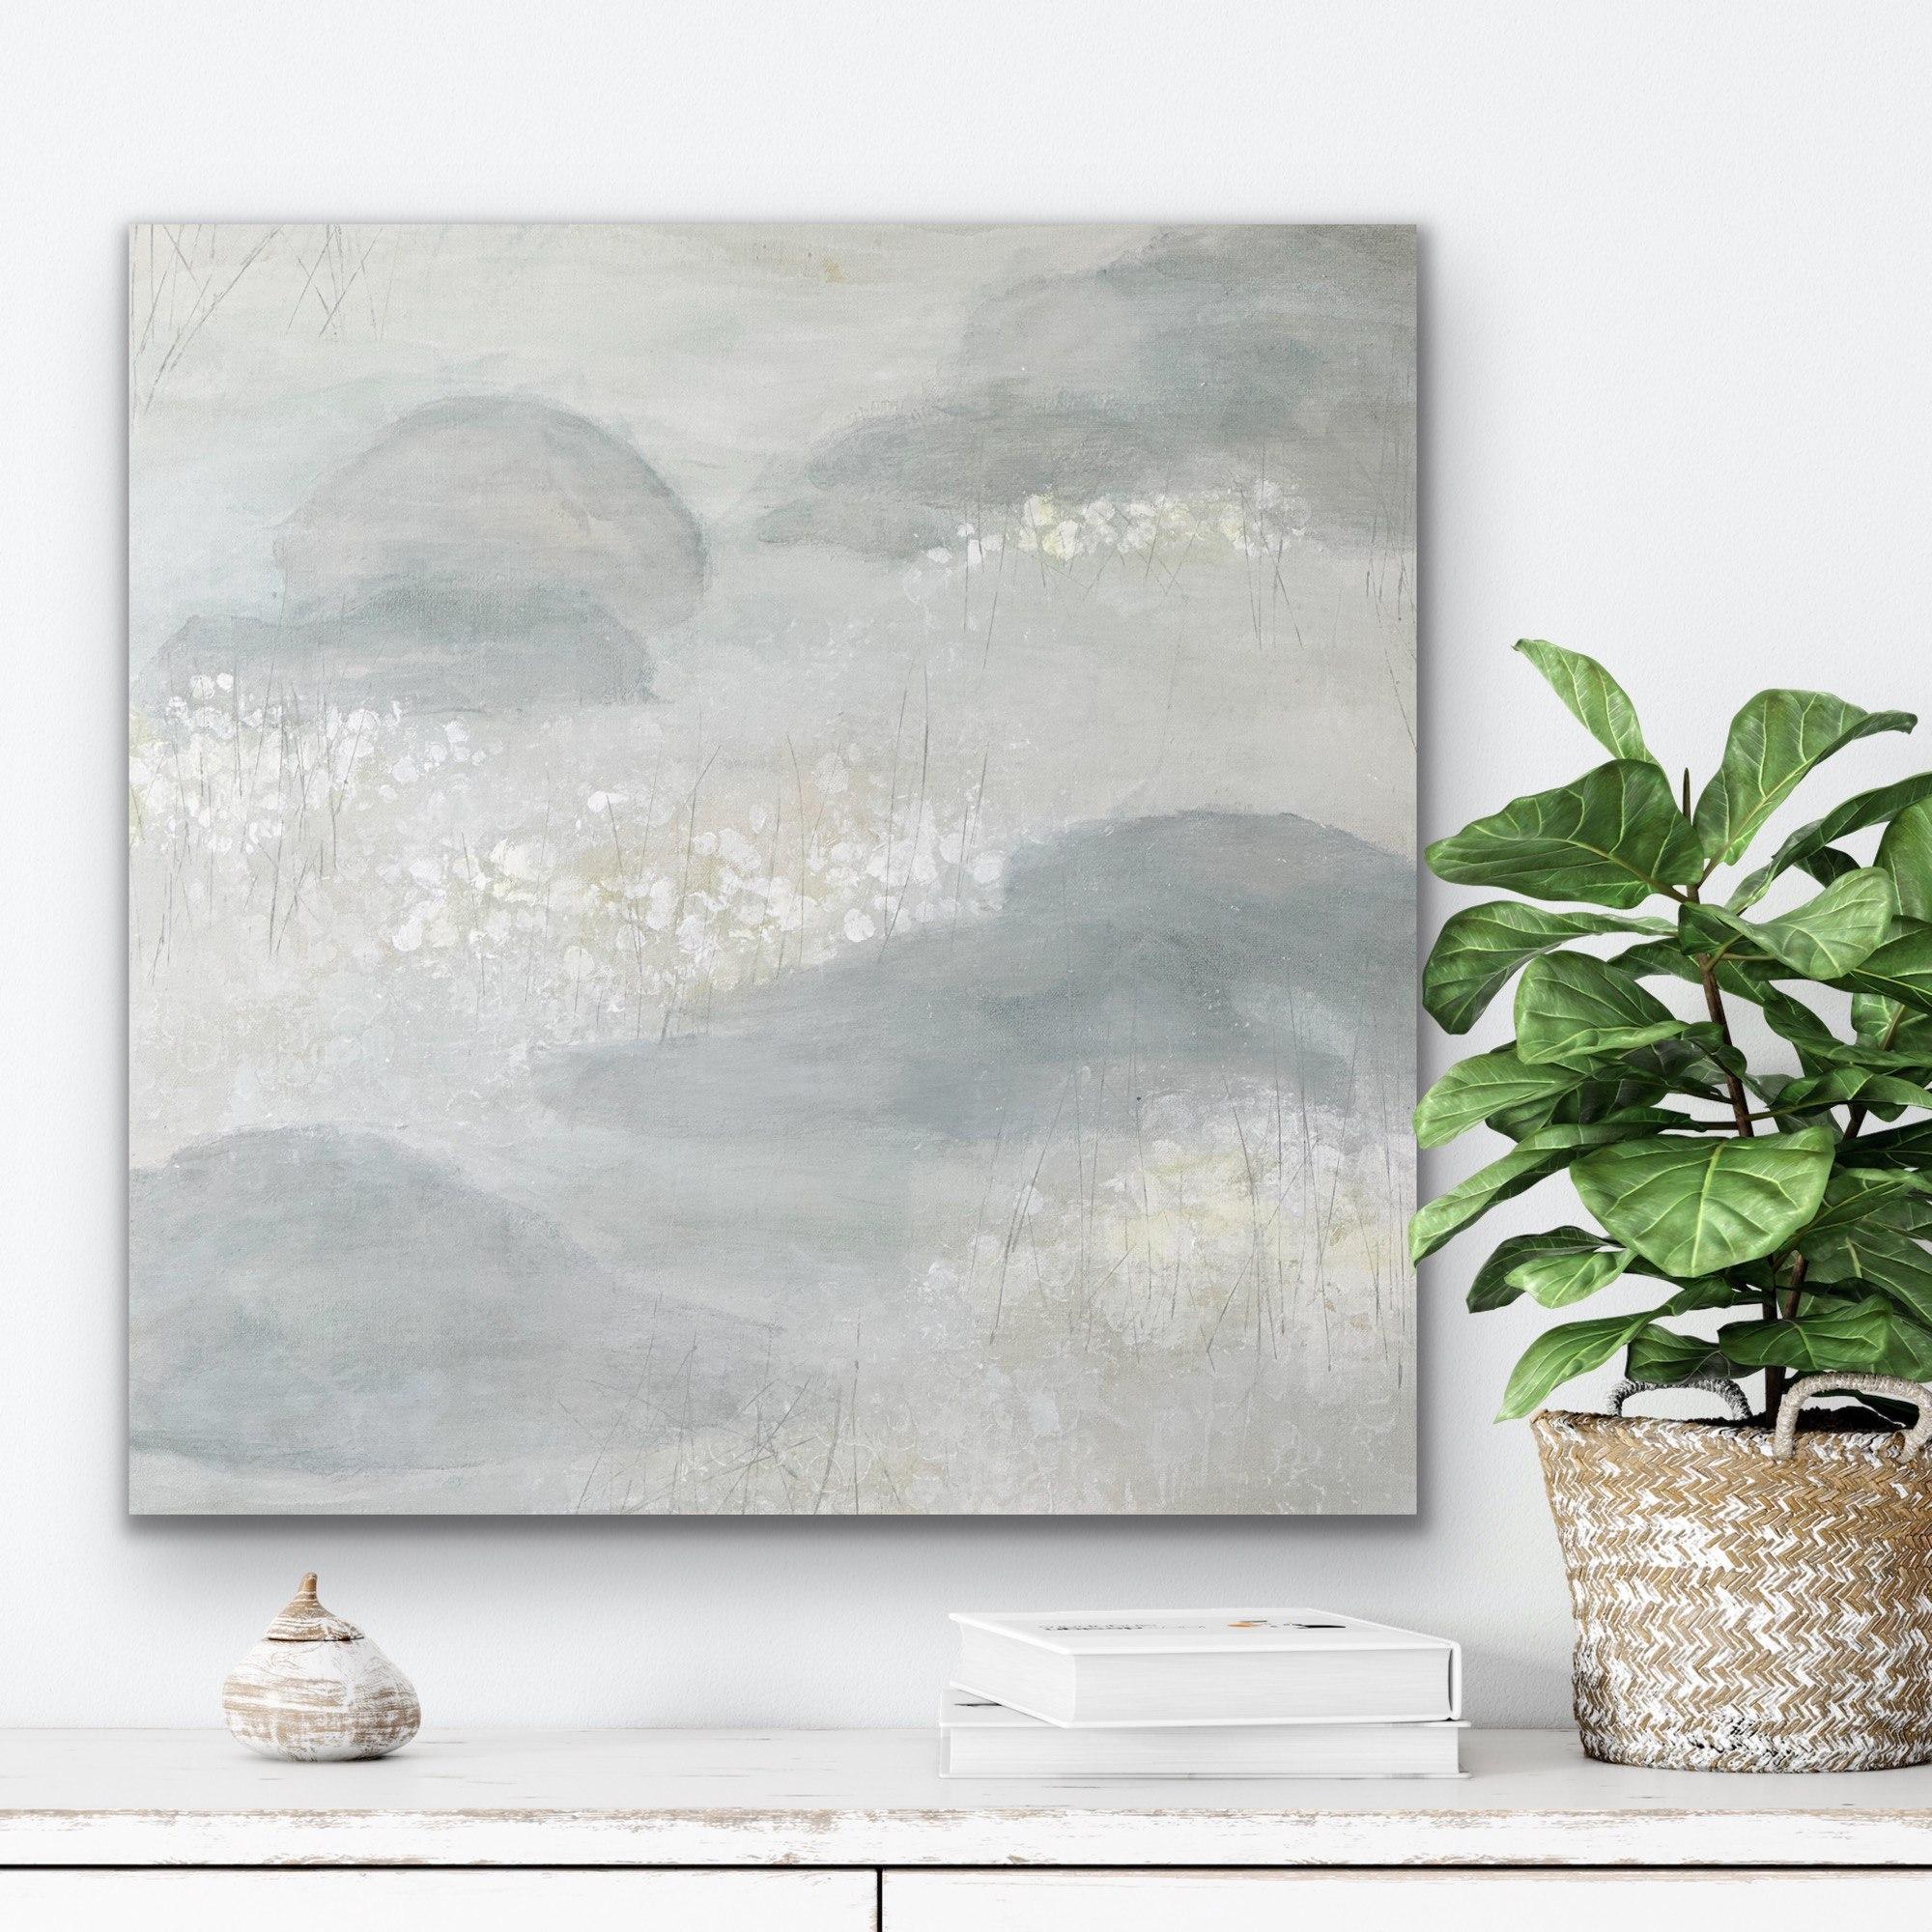 The Pond in February 1, lily pond, neutral, soft art - Painting by Juanita Bellavance 